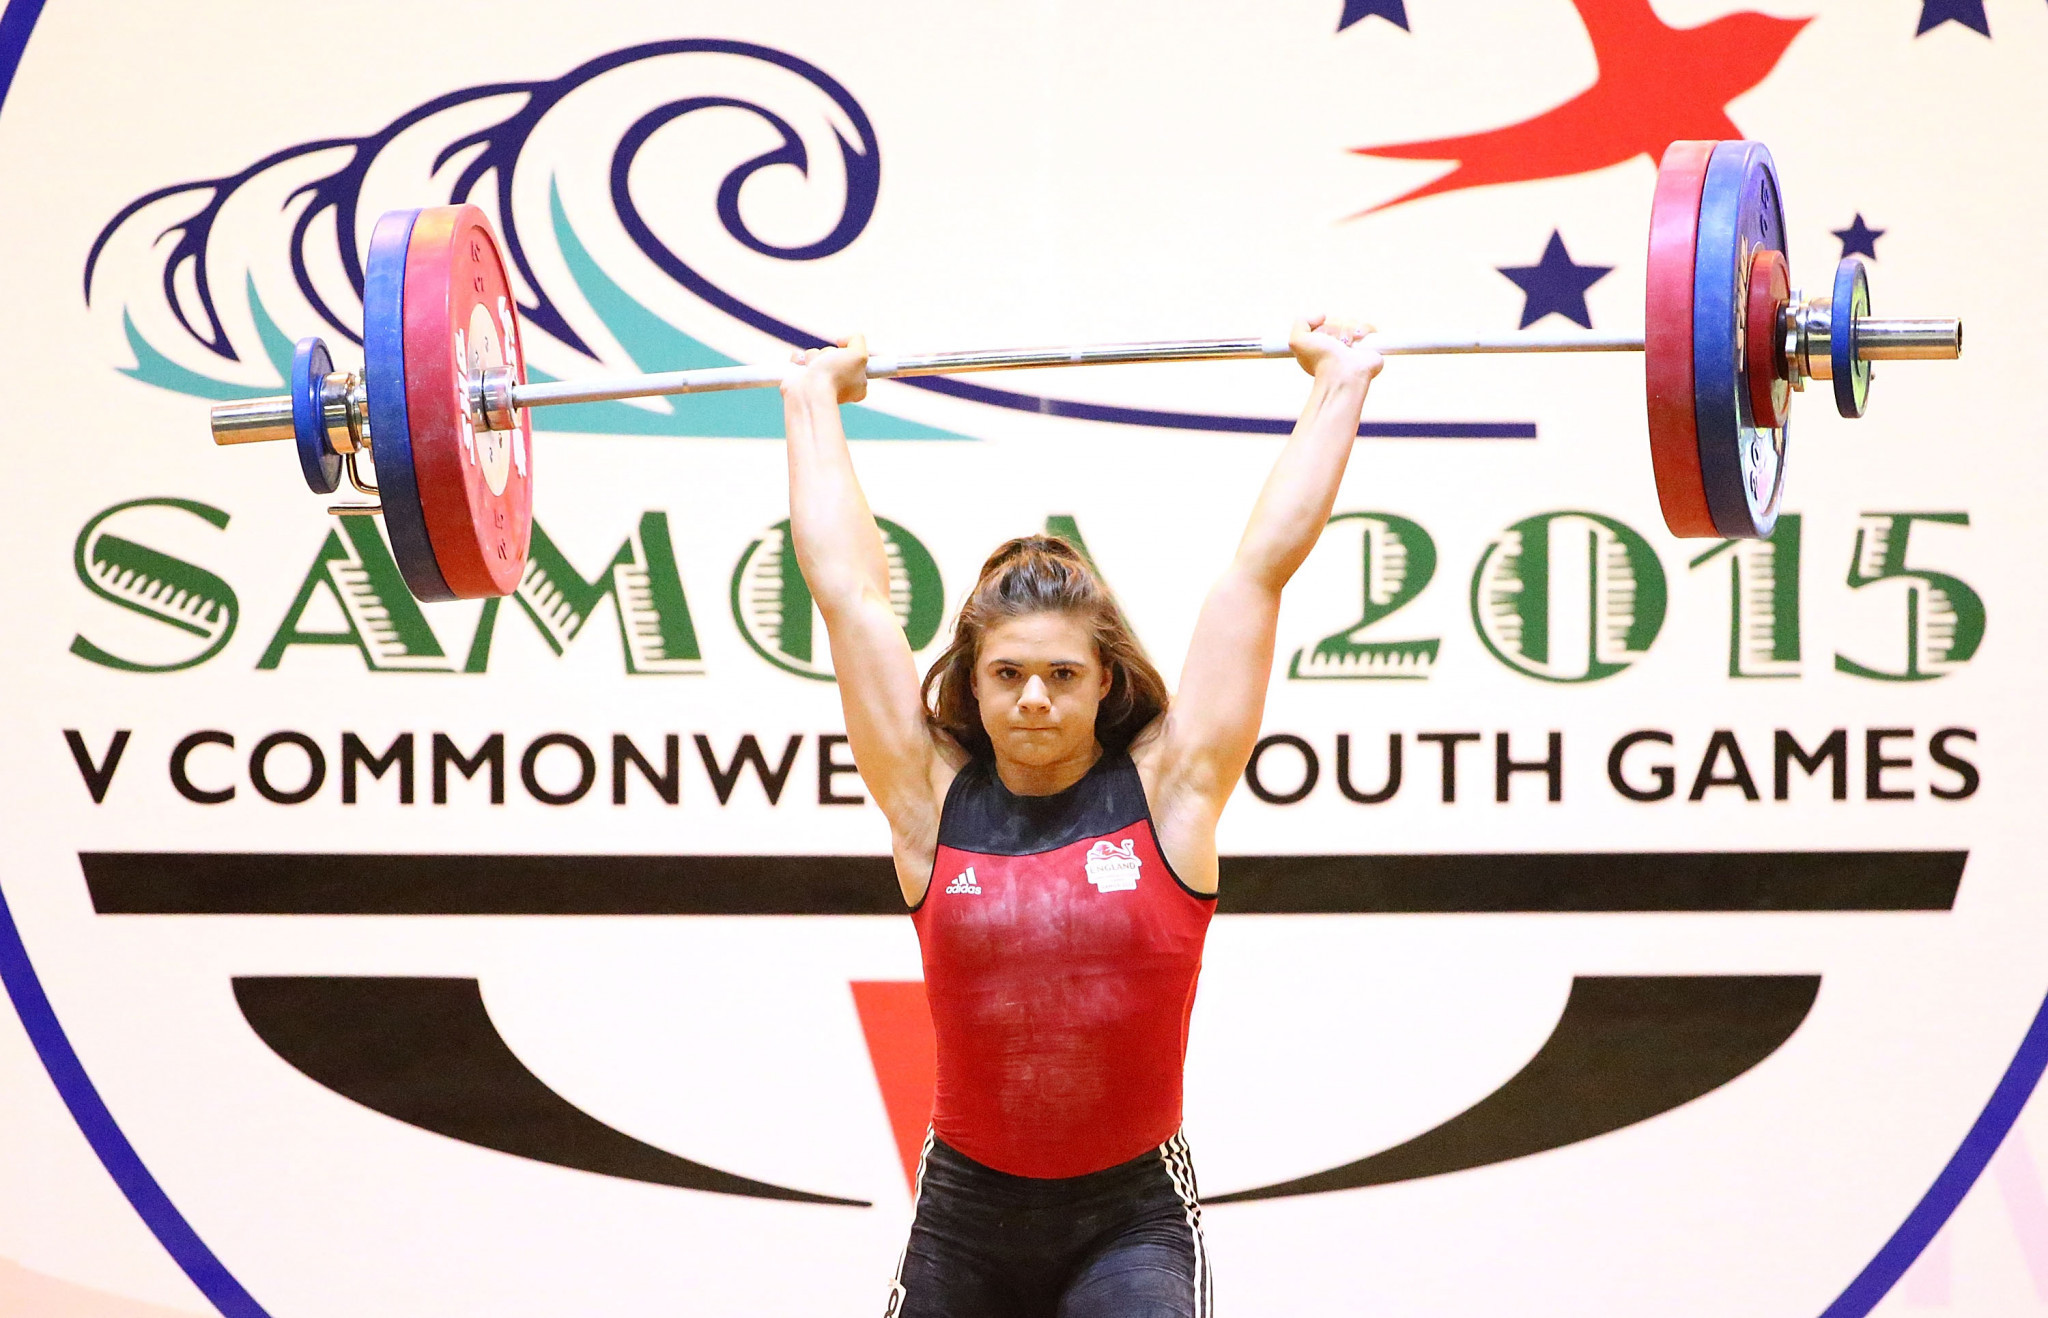 Rebekah Tiler lifts at the Samoa 2015 Commonwealth Youth Games ©Getty Images